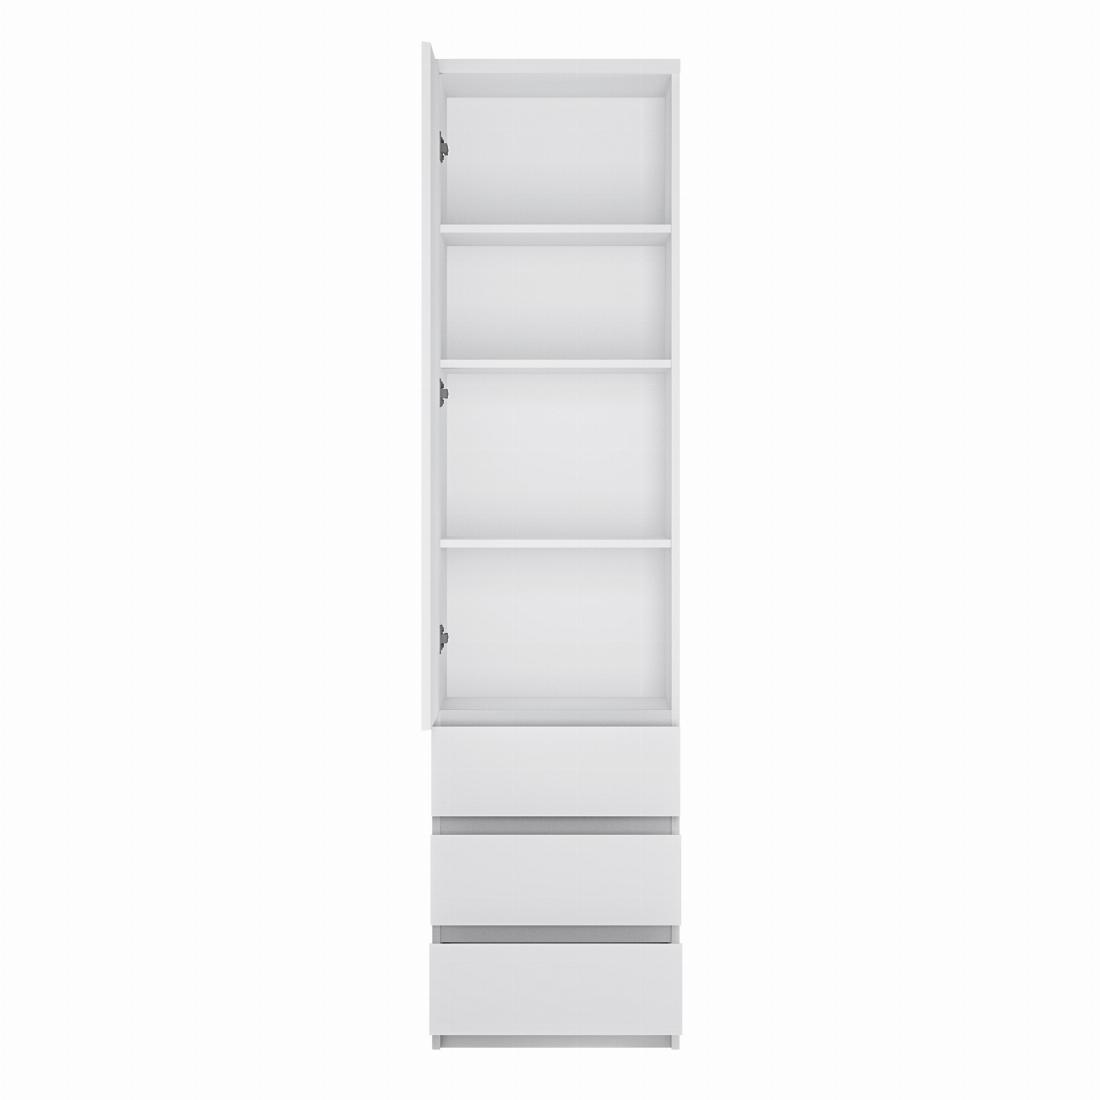 Fribo Tall narrow 1 door 3 drawer cupboard in White